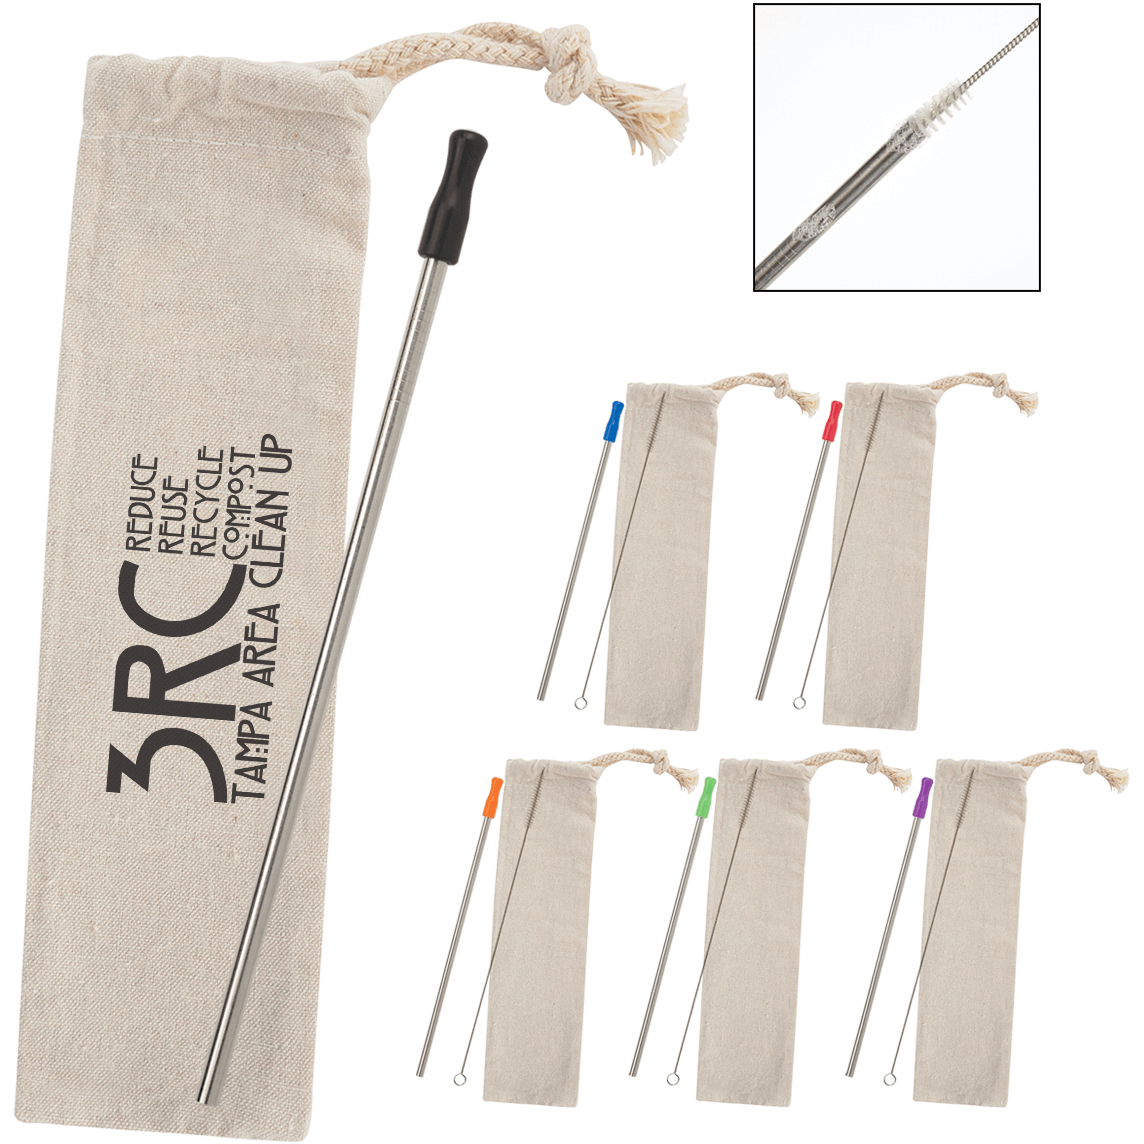 Customizable Stainless Steel Straw Kit with Cotton Pouch